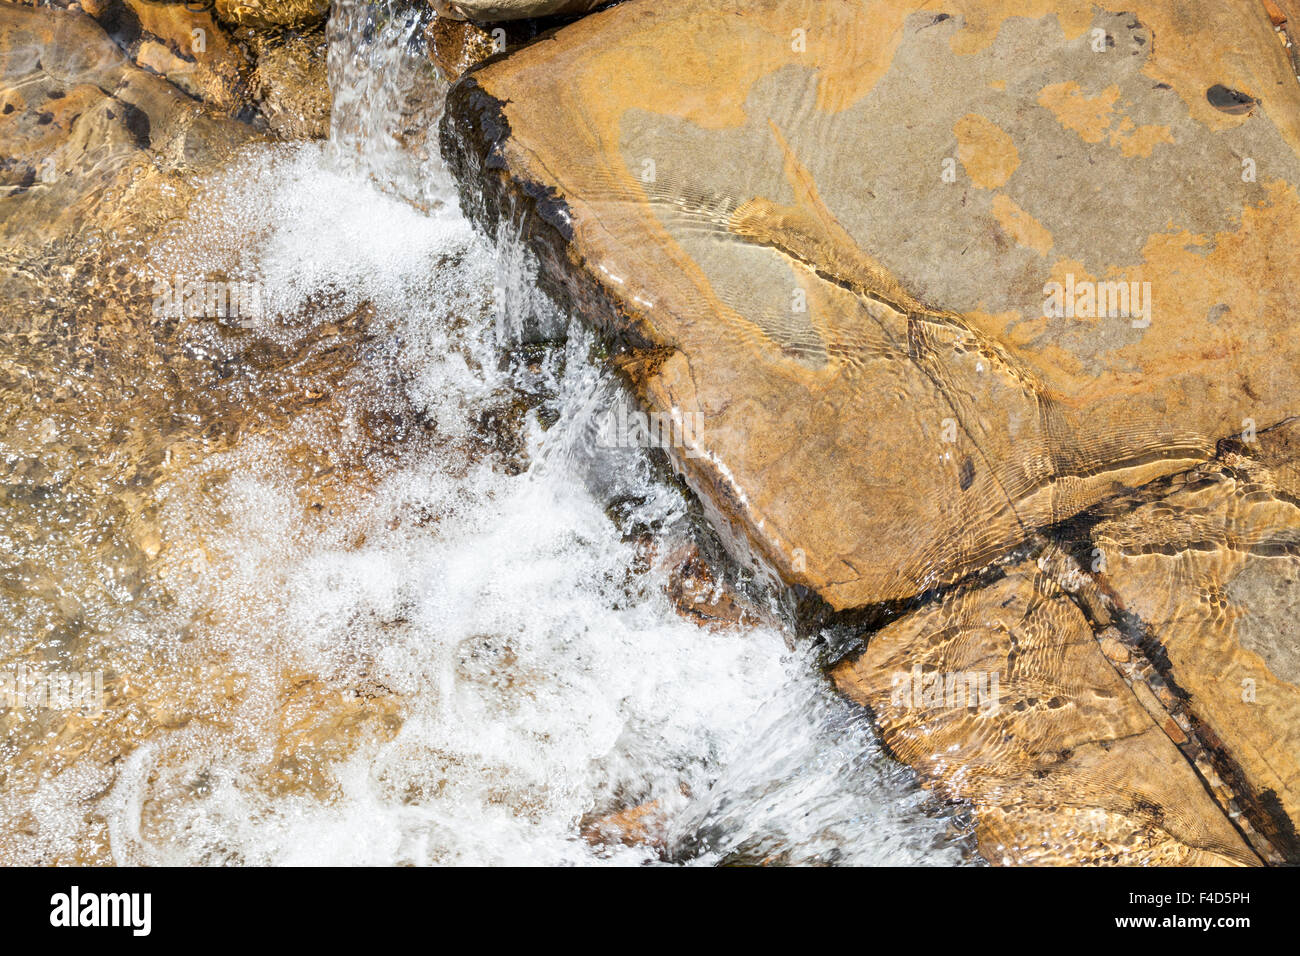 Close up of stream water flowing over rocks, England, UK Stock Photo